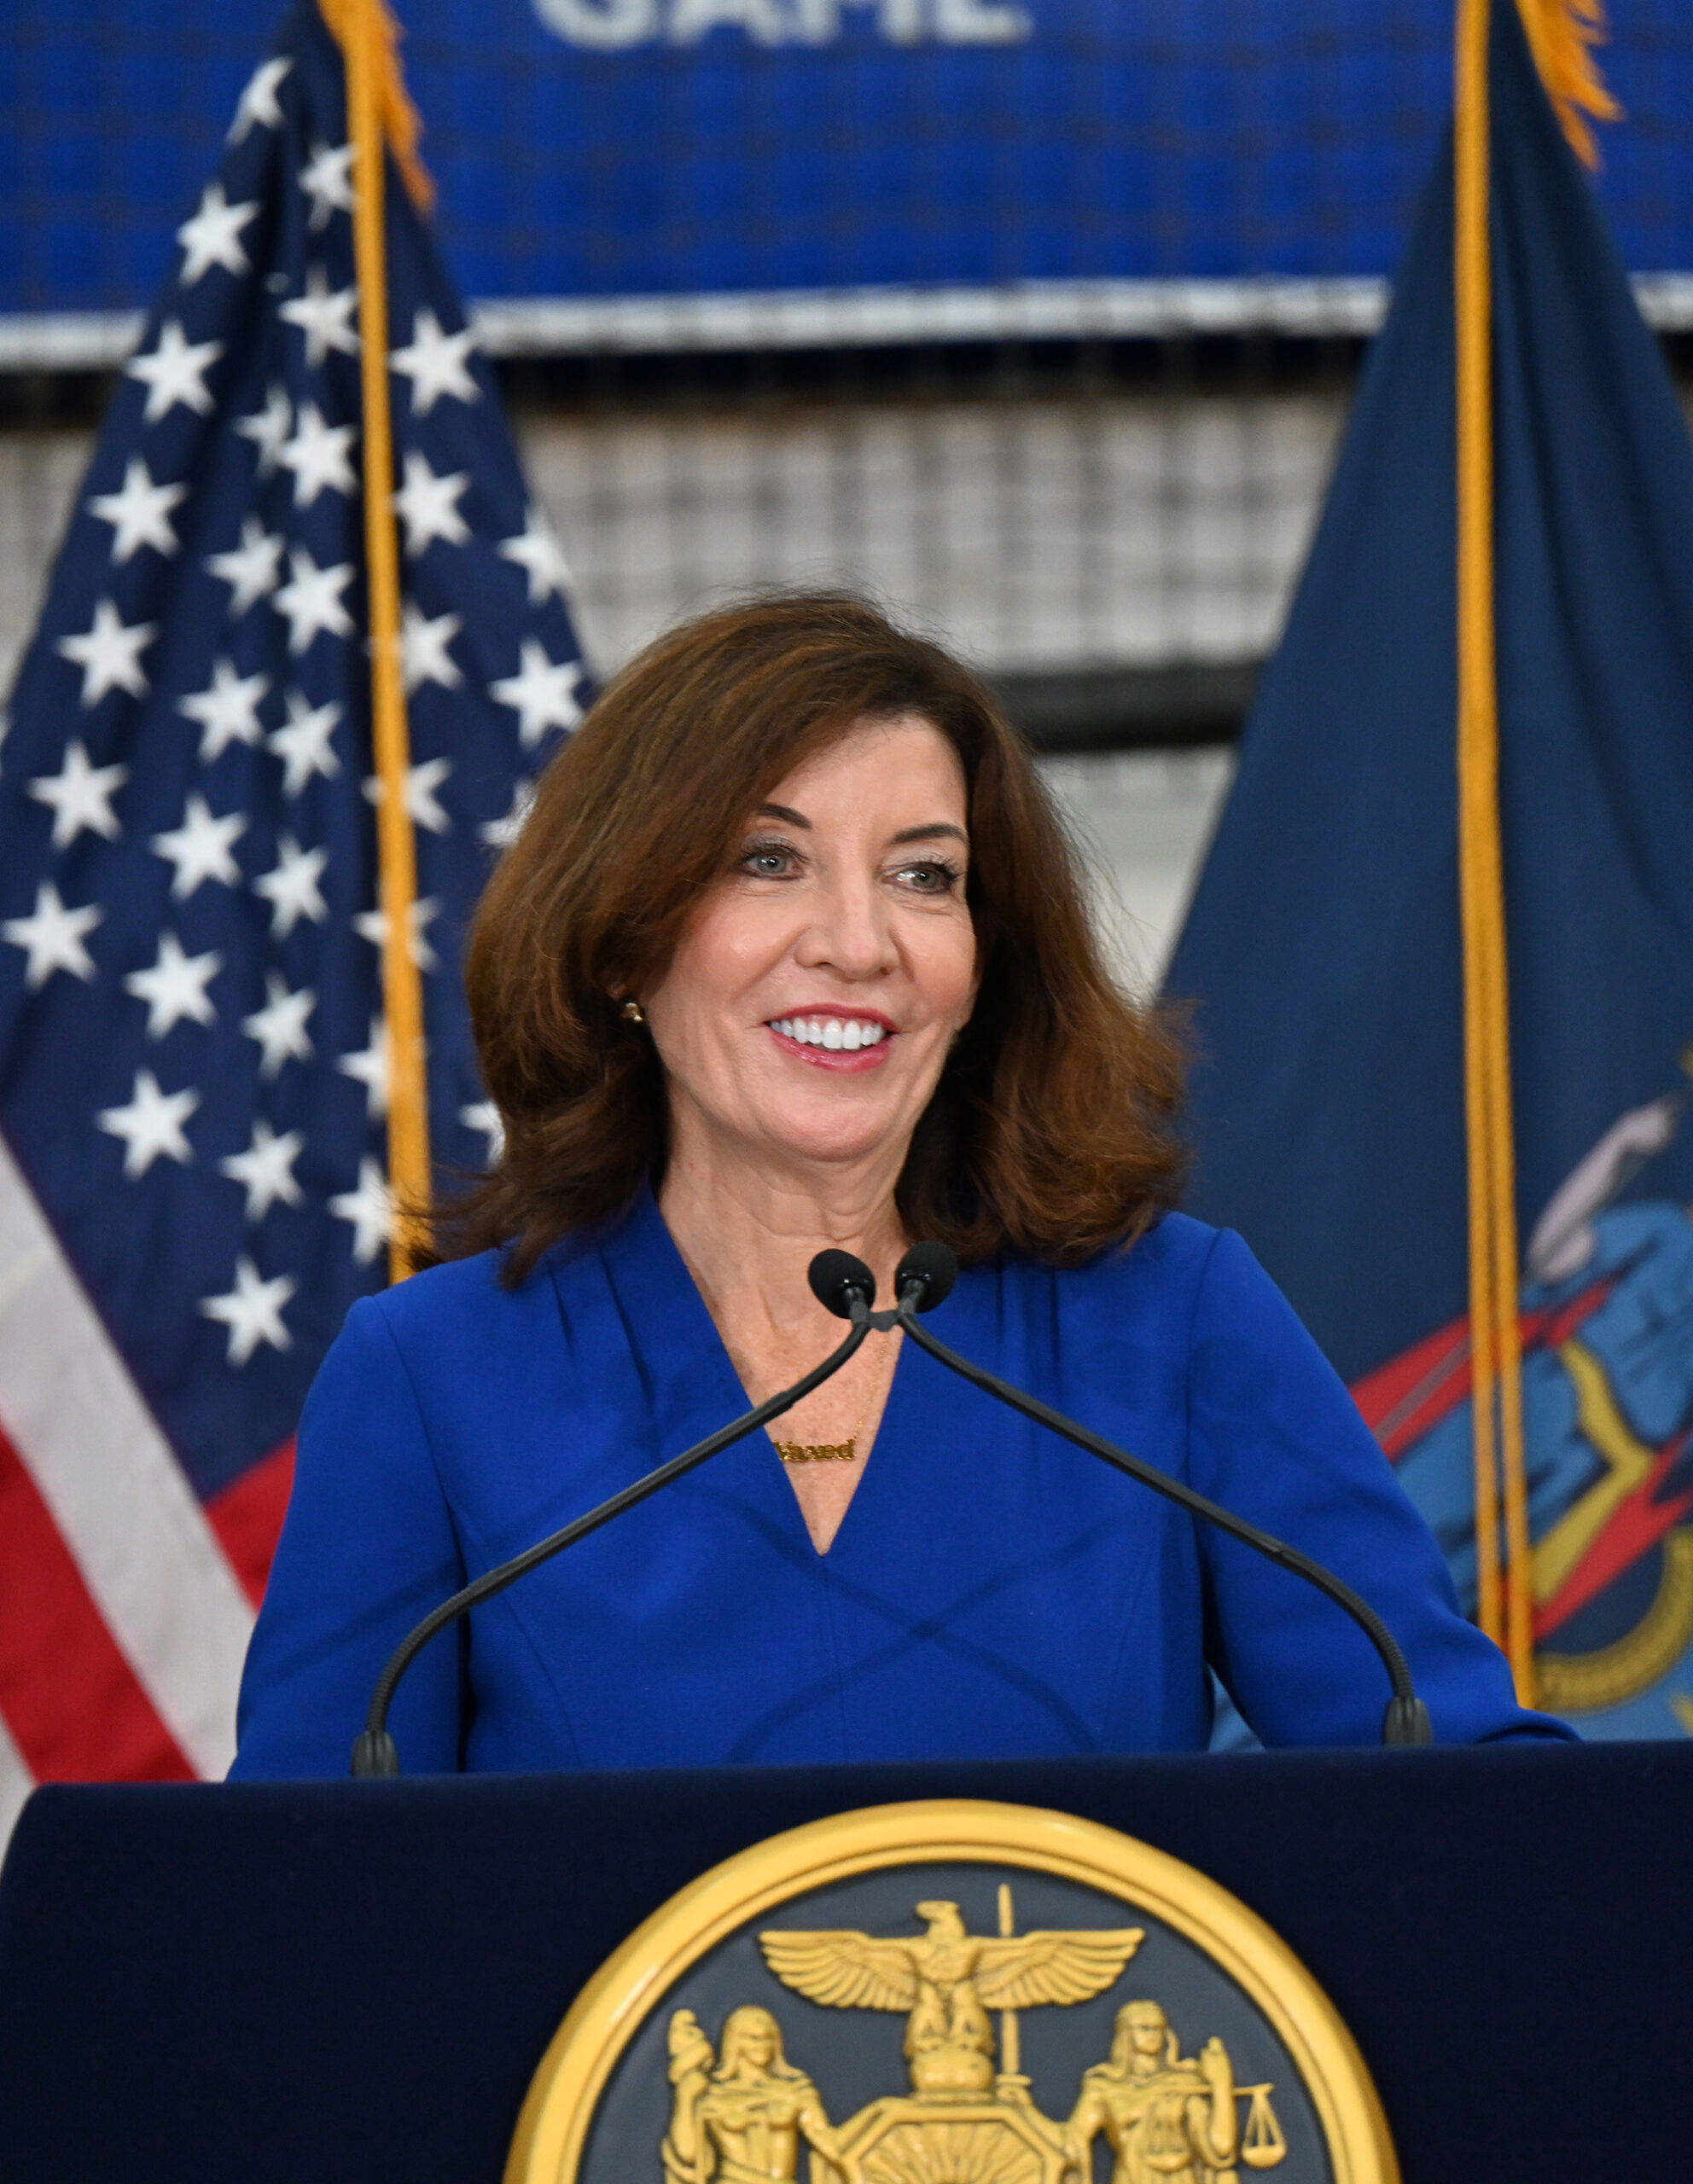 Governor Hochul speaks after signing legislation helping homeless, disabled and elderly snap recipients to purchase prepared meals